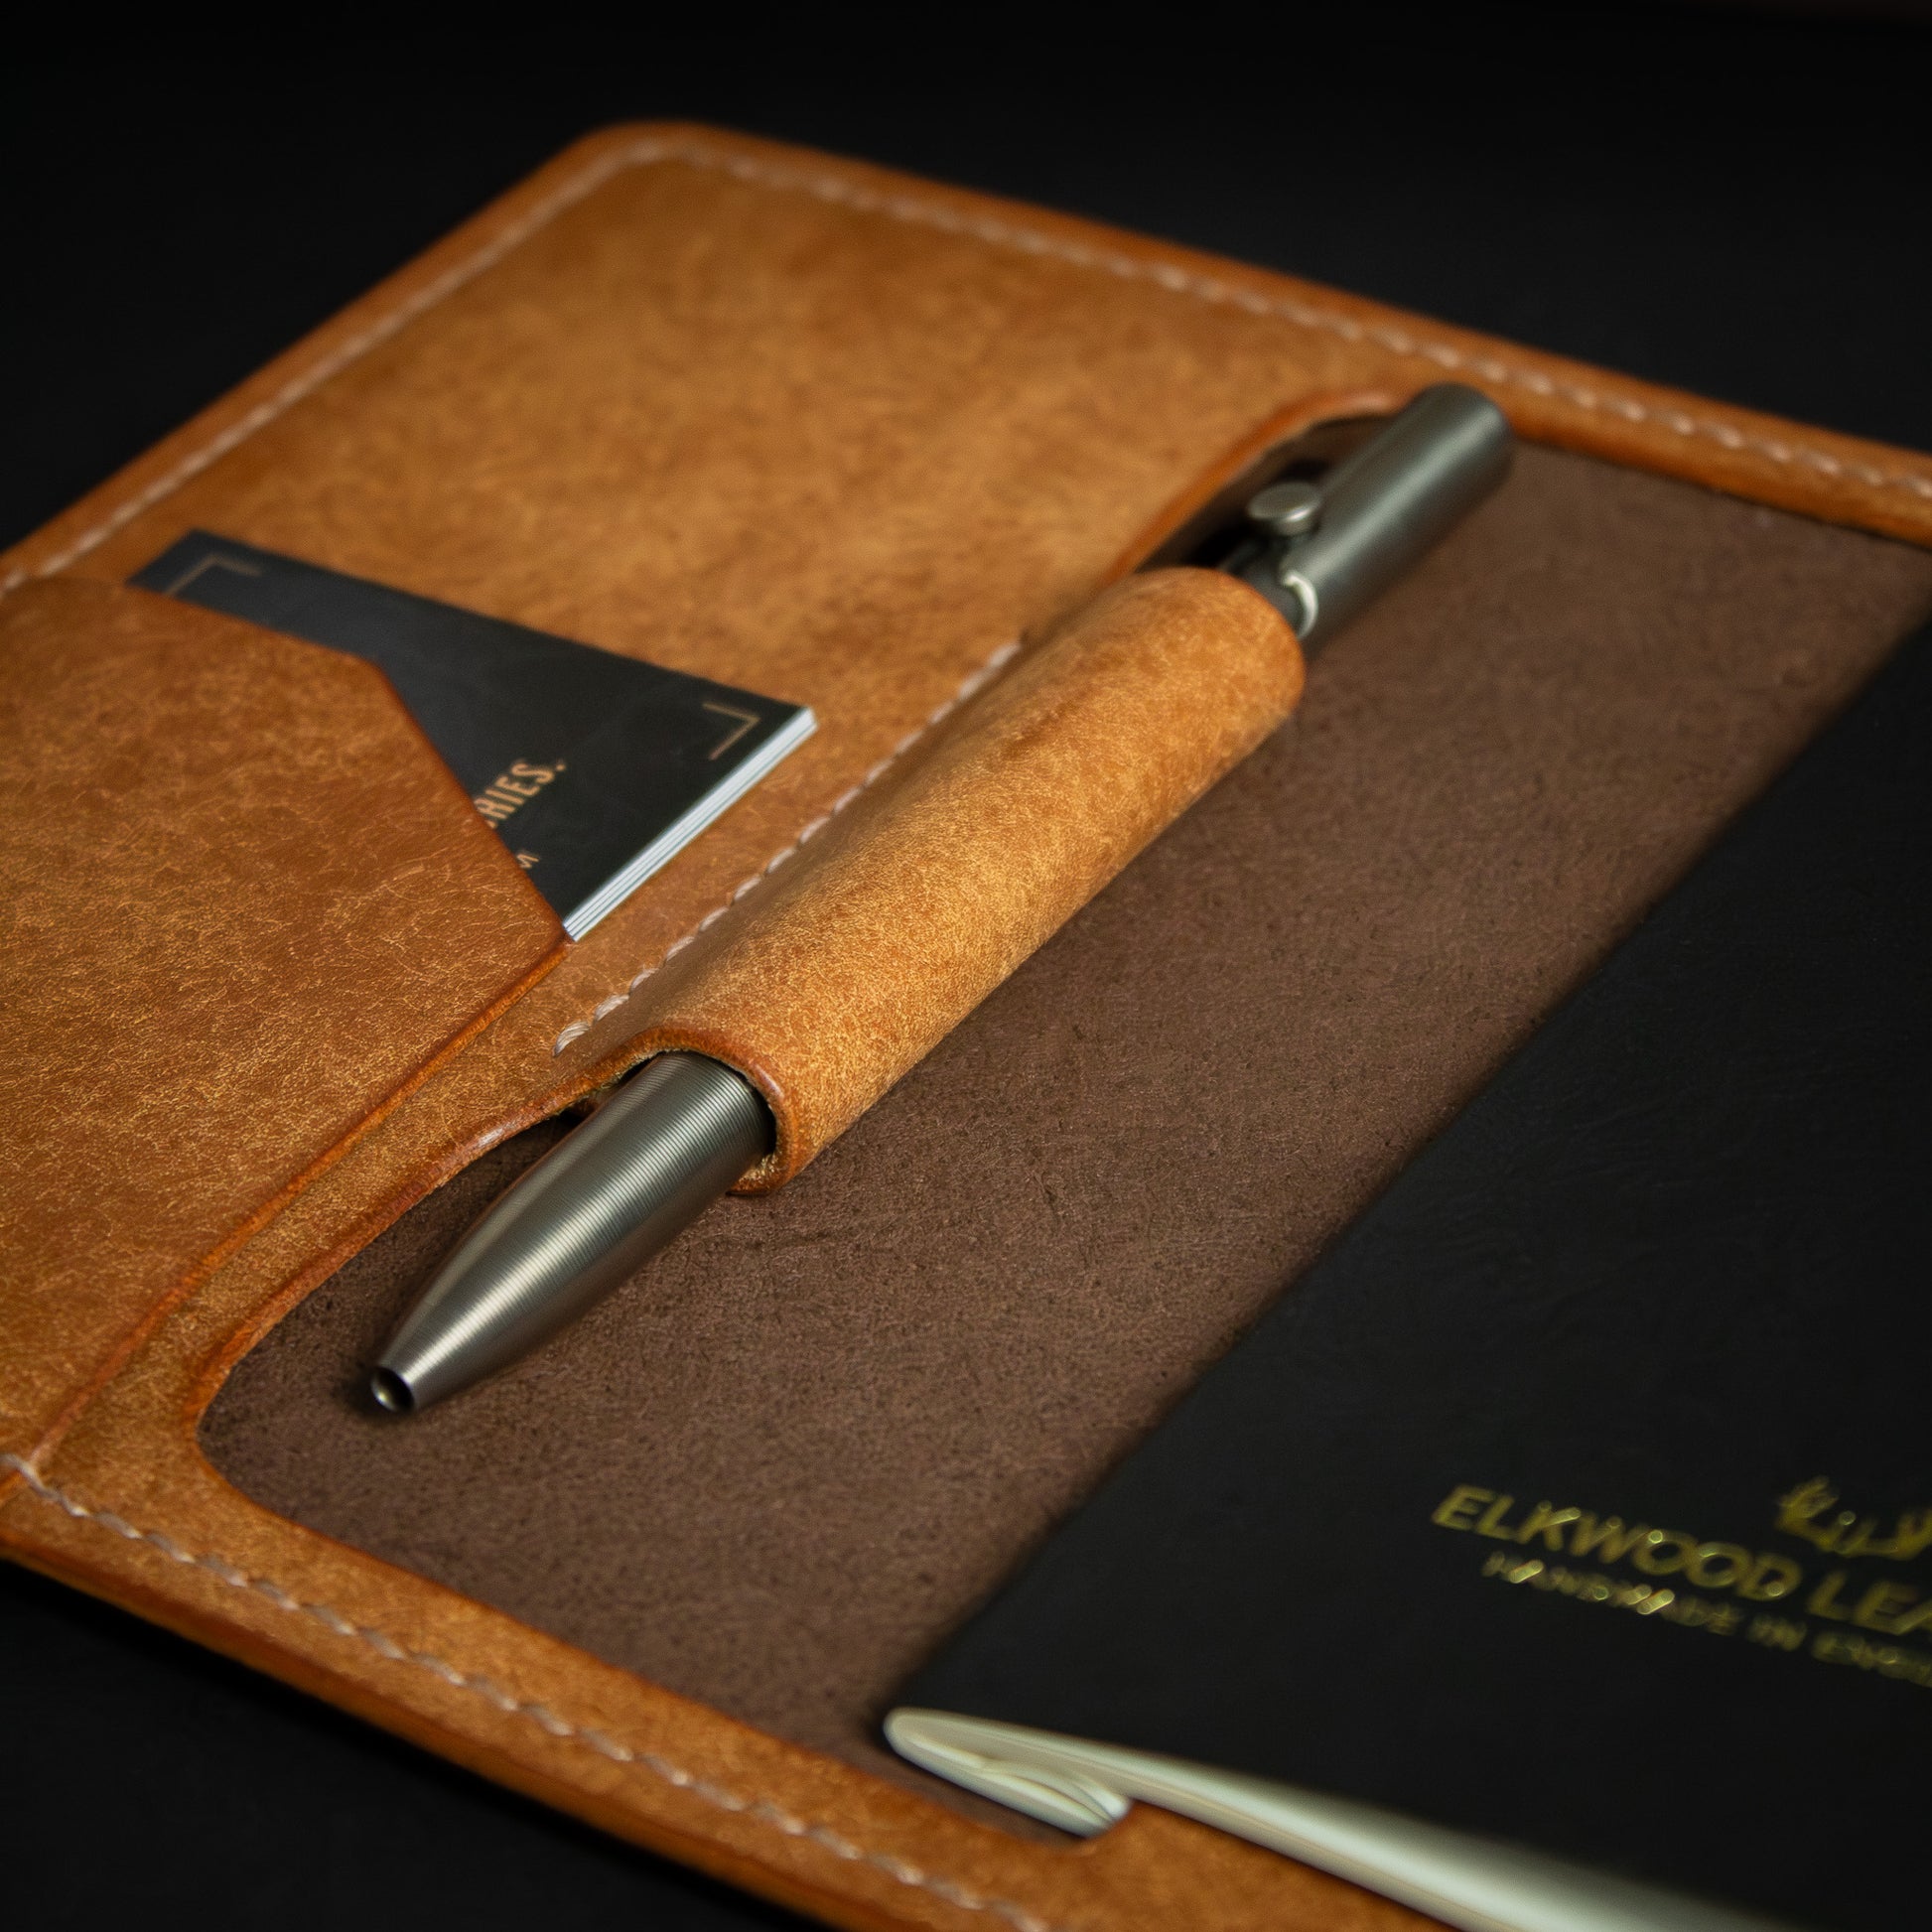 Handmade Leather Notebook Holder close up of pen holder and card slot. Leather Journal - Castagno & Cognac Peublo Leather